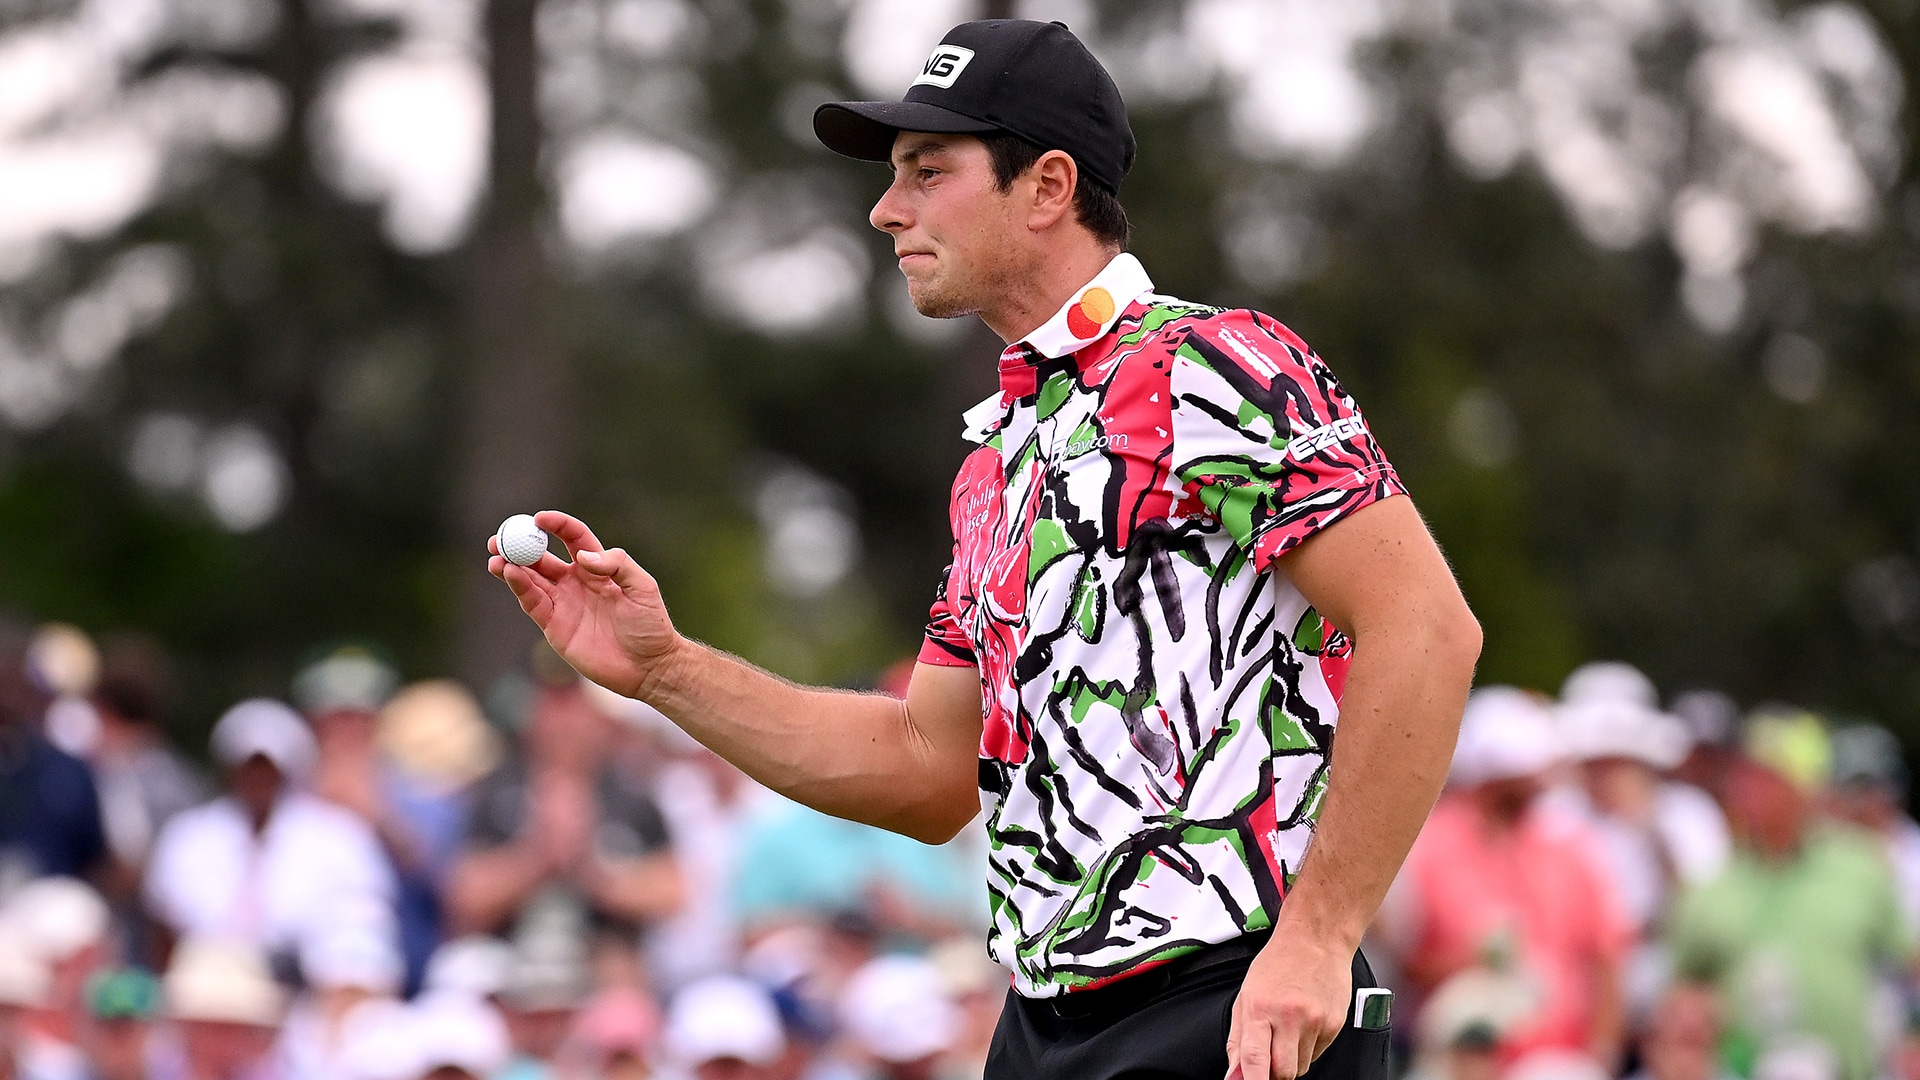 2023 Masters: Viktor Hovland’s gamble, short game produce first sub-70 Masters round